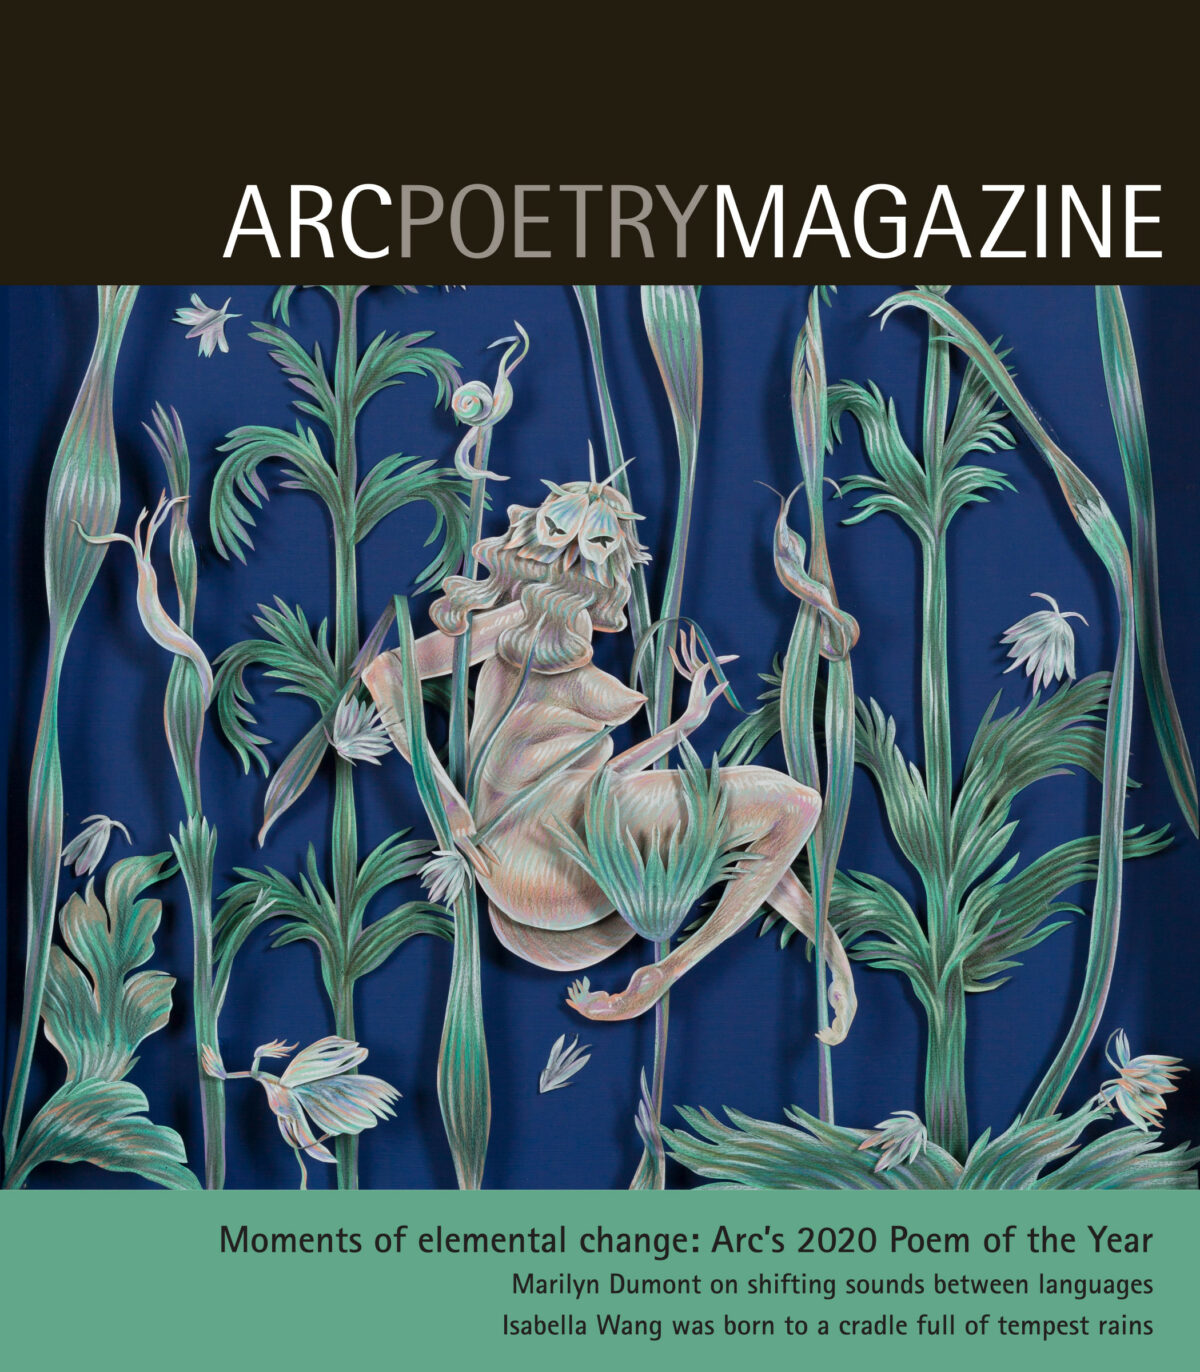 the cover of Arc's 92 issues, which is black, green and blue and has plants and a naked person with breasts in a style that resembles paper cutouts